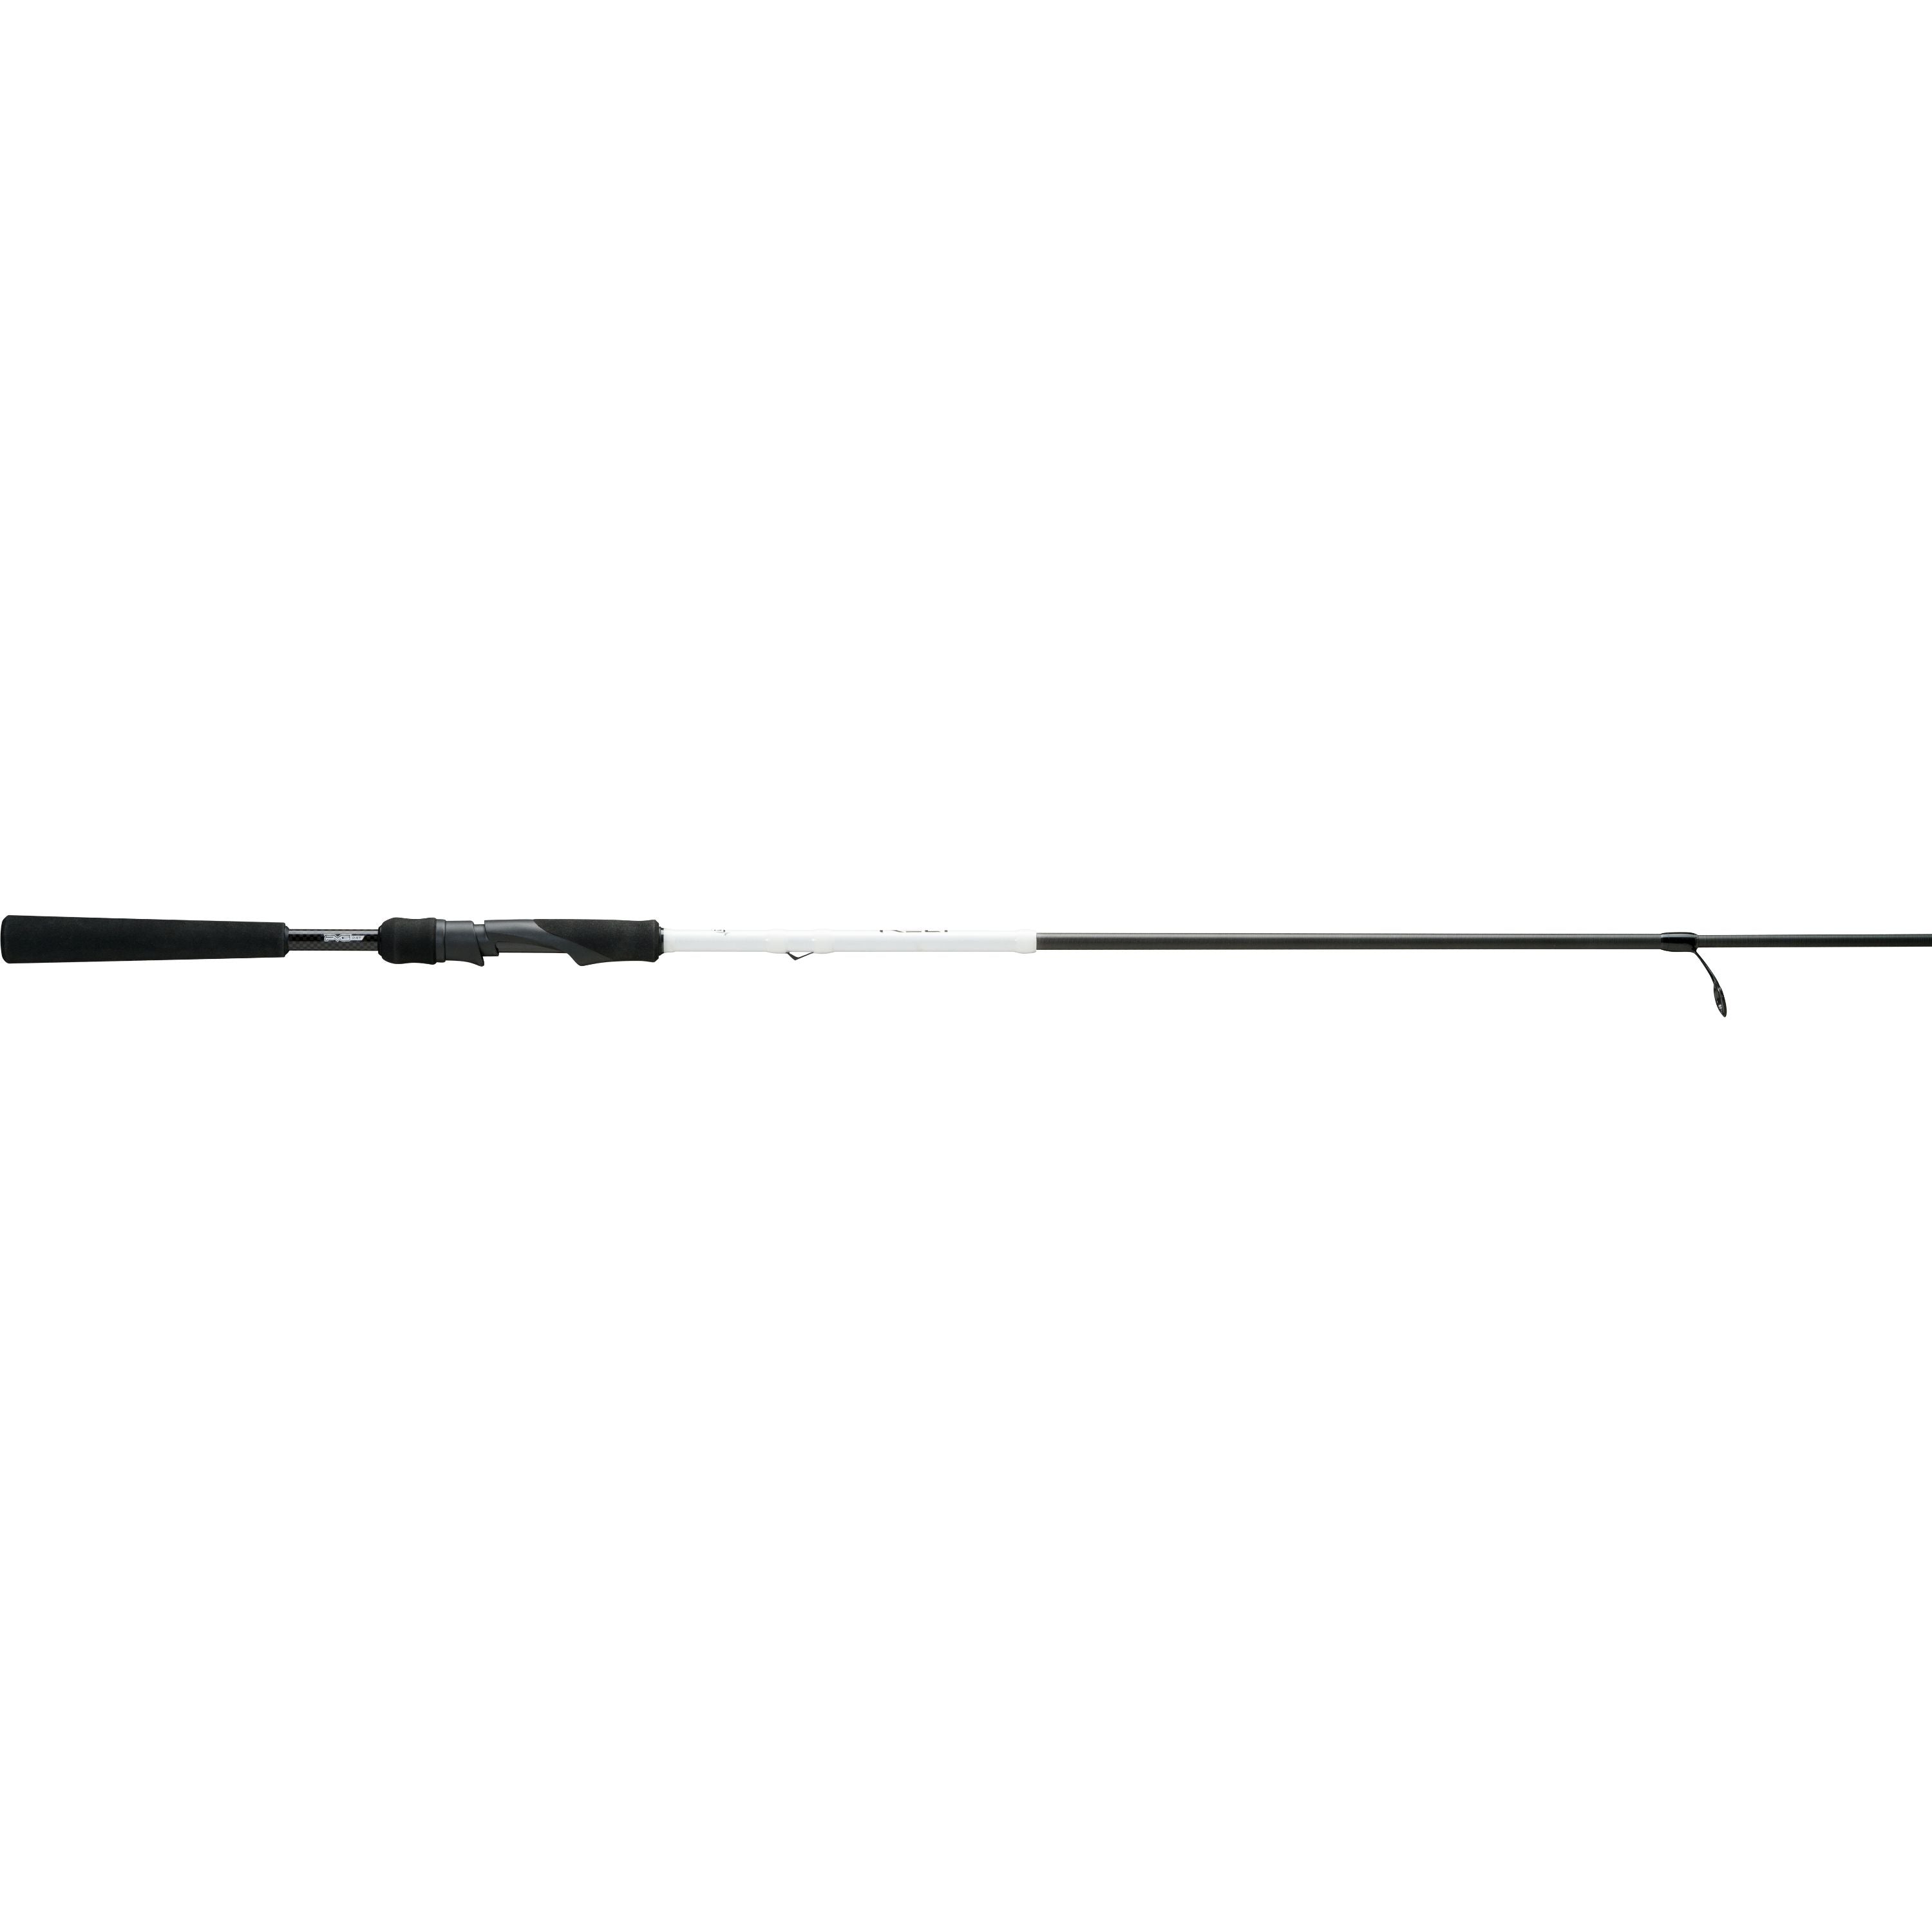 Rely Black Spinning rod